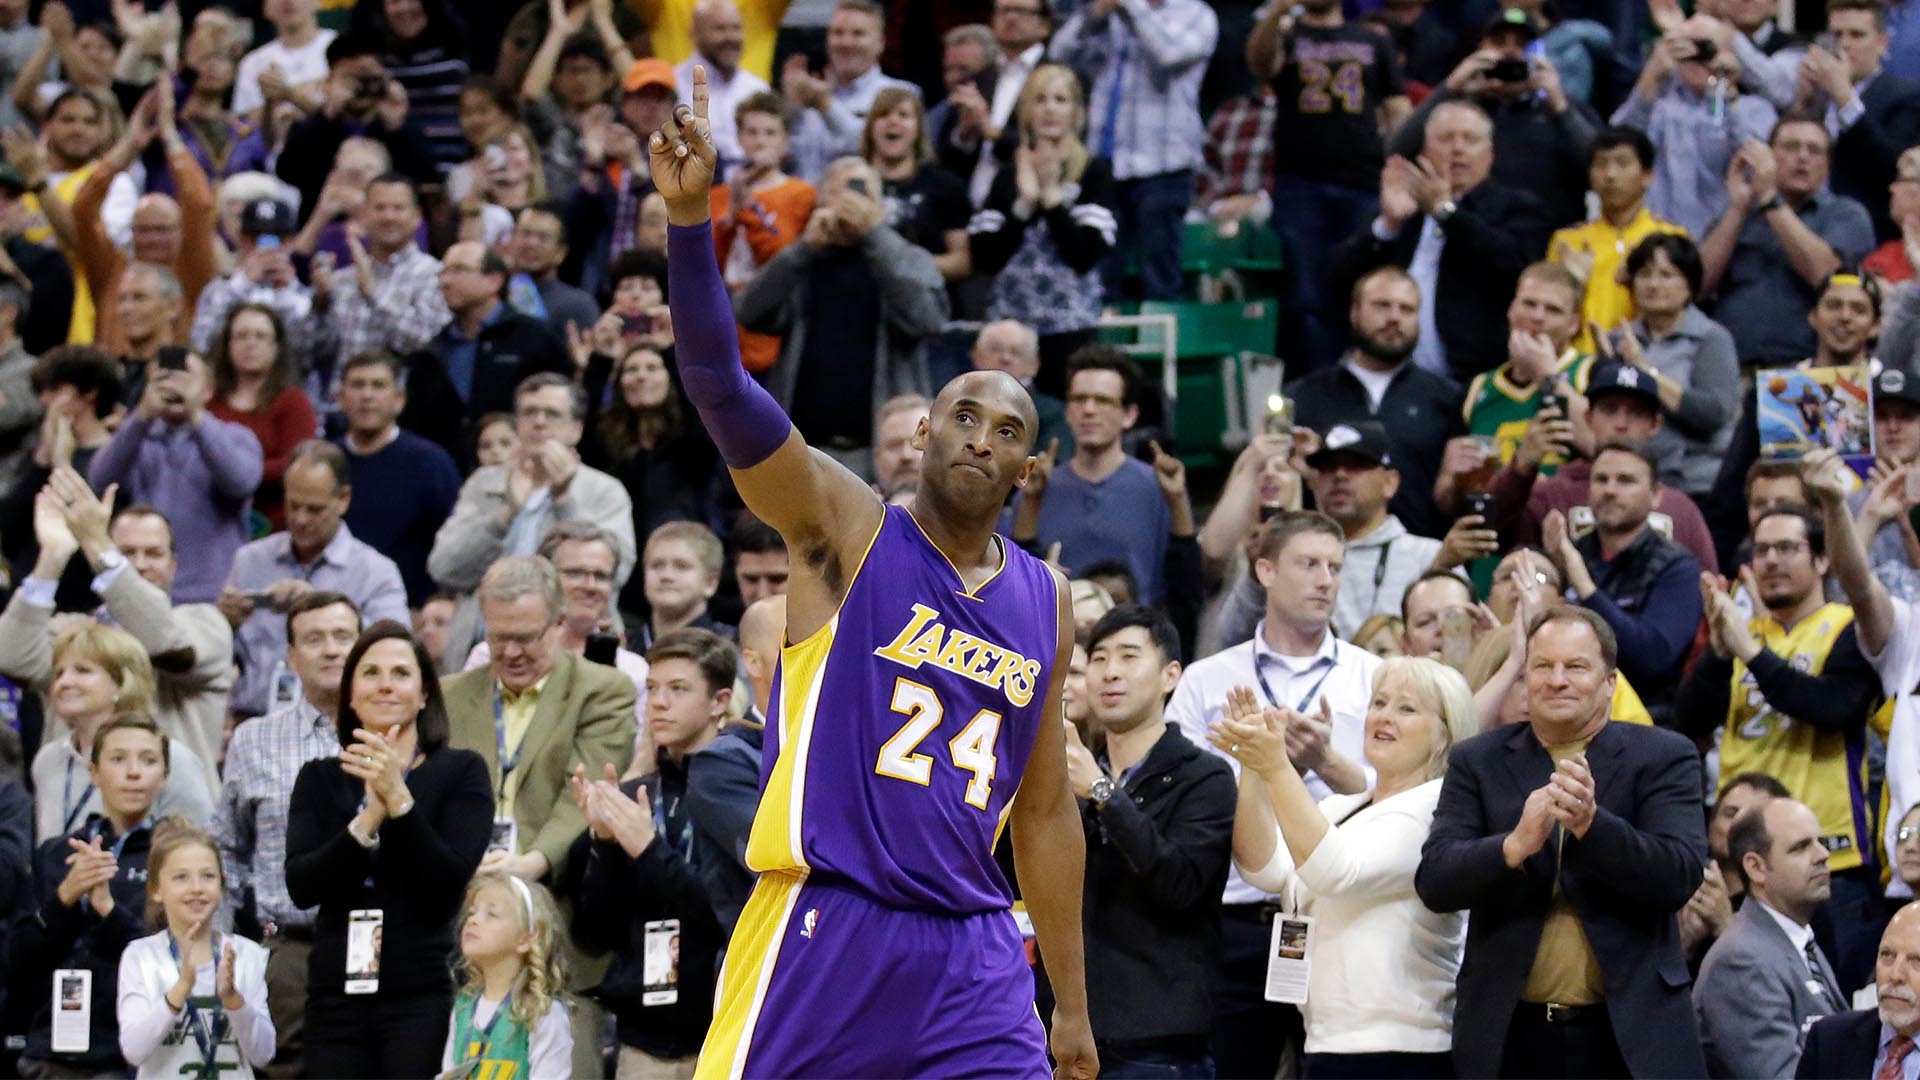 24 quintessential moments of Kobe Bryant's career